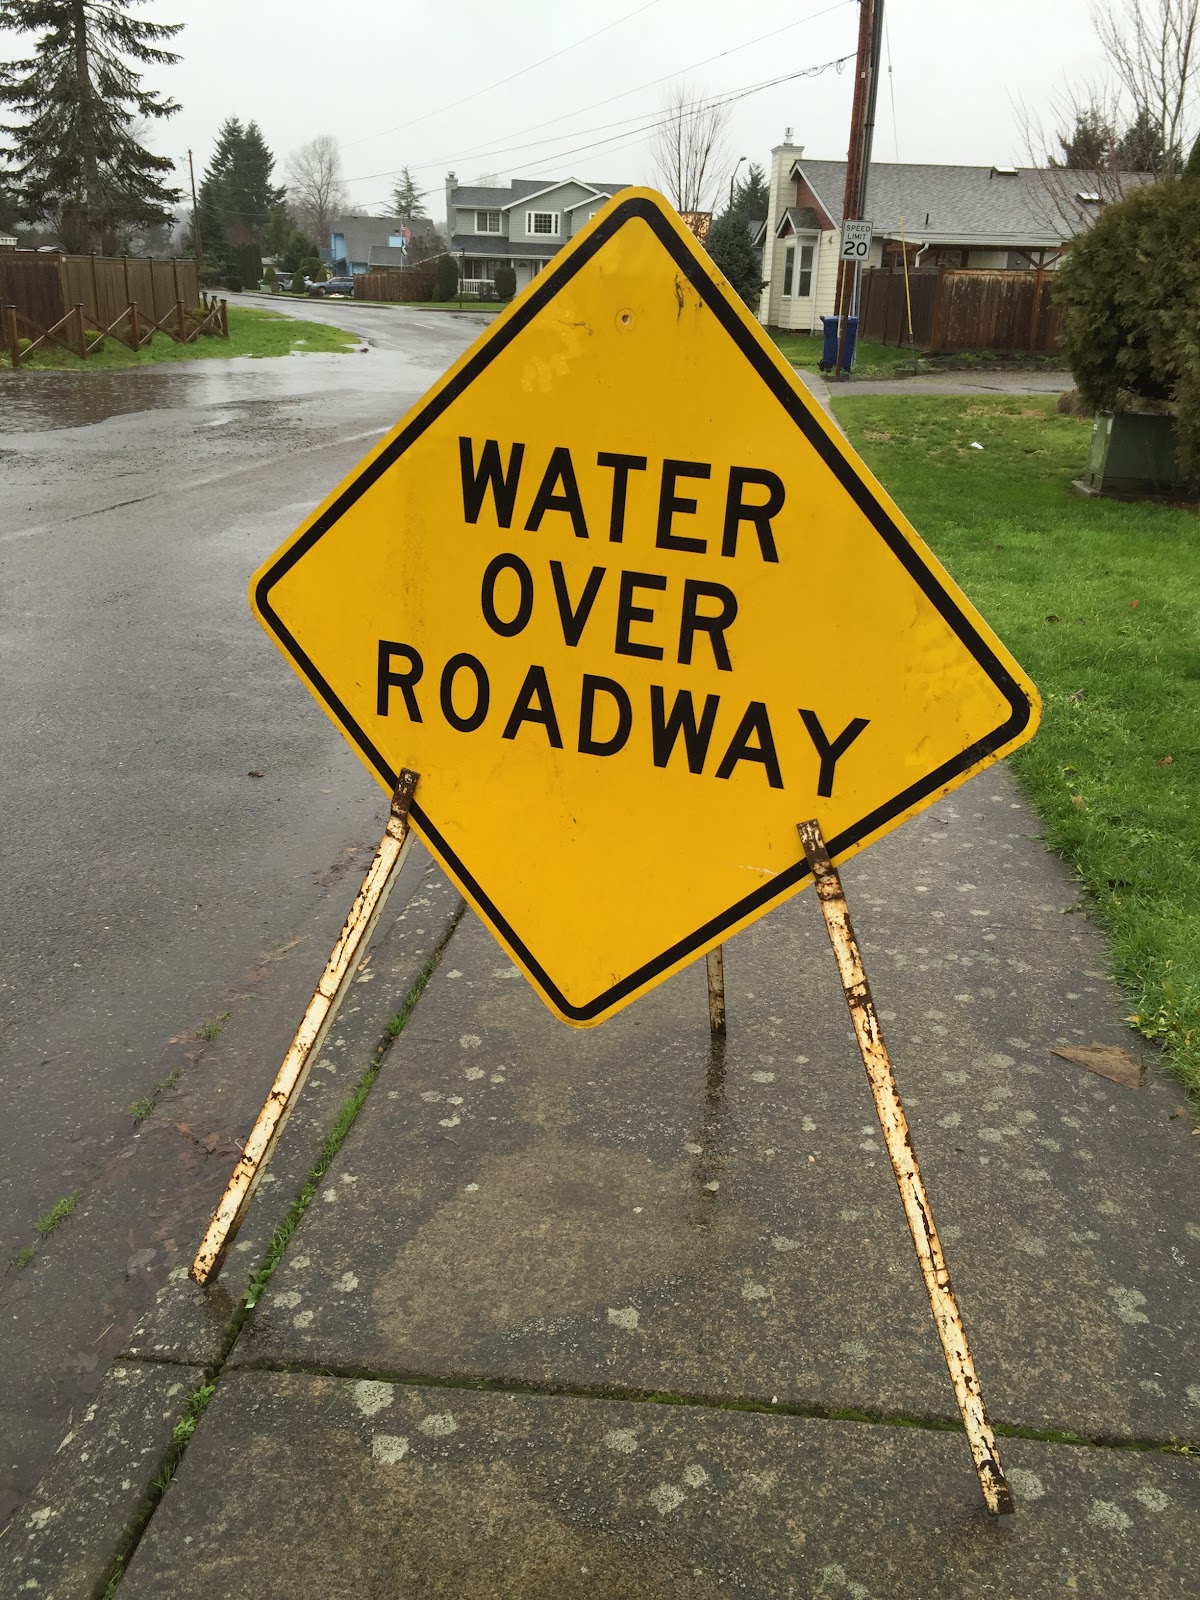 https://upload.wikimedia.org/wikipedia/commons/3/3a/WATER_OVER_ROADWAY%2C_warning_road_signs.jpg